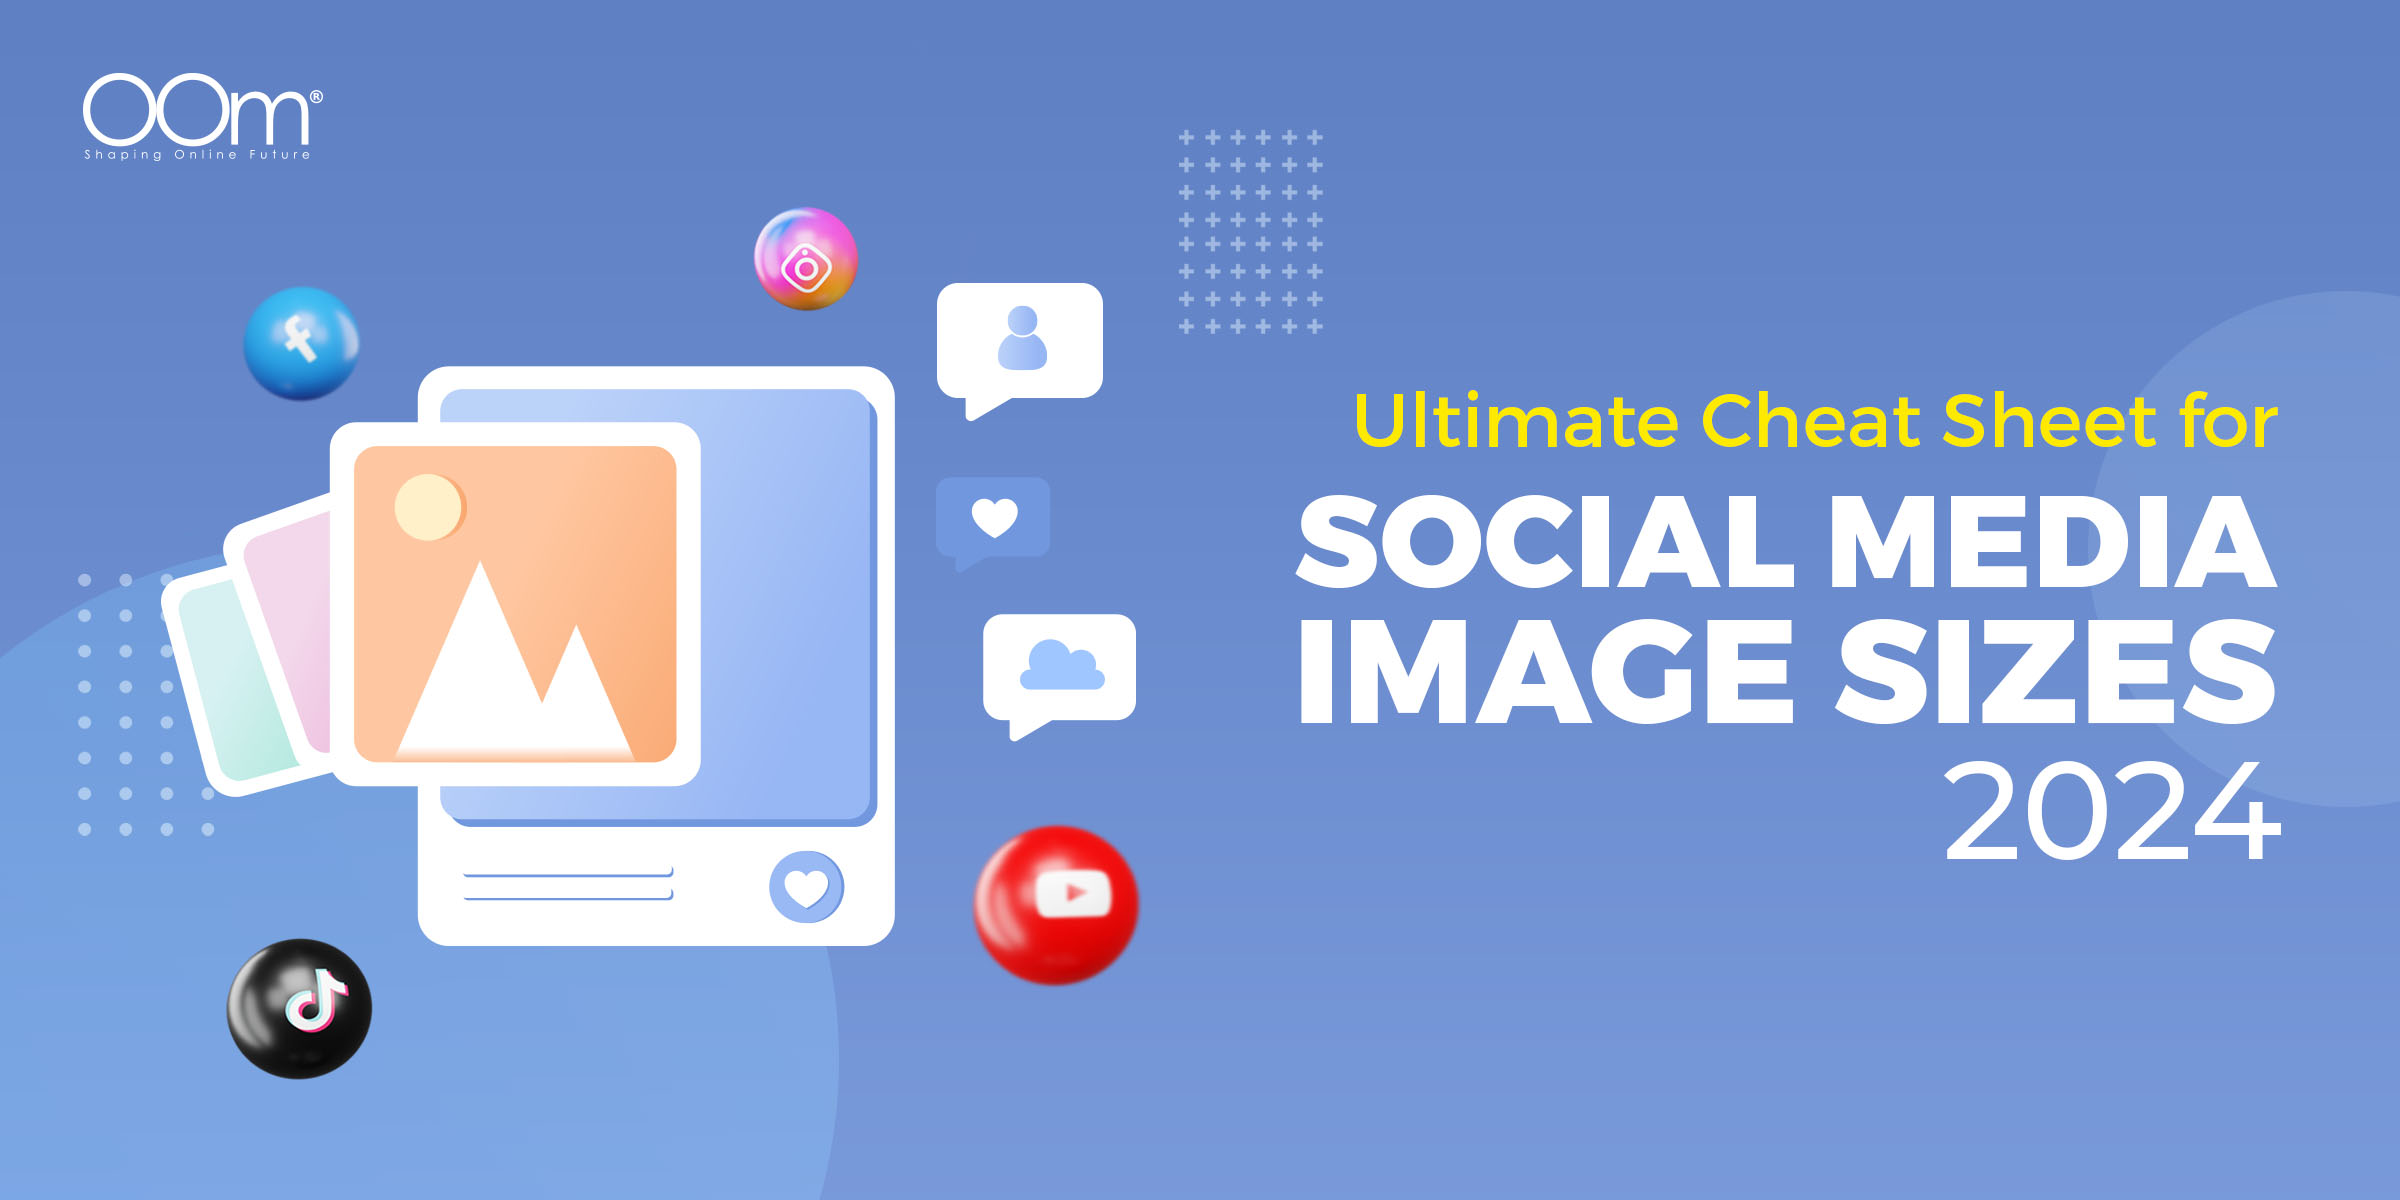 Ultimate Cheat Sheet for Social Media Image Sizes 2024